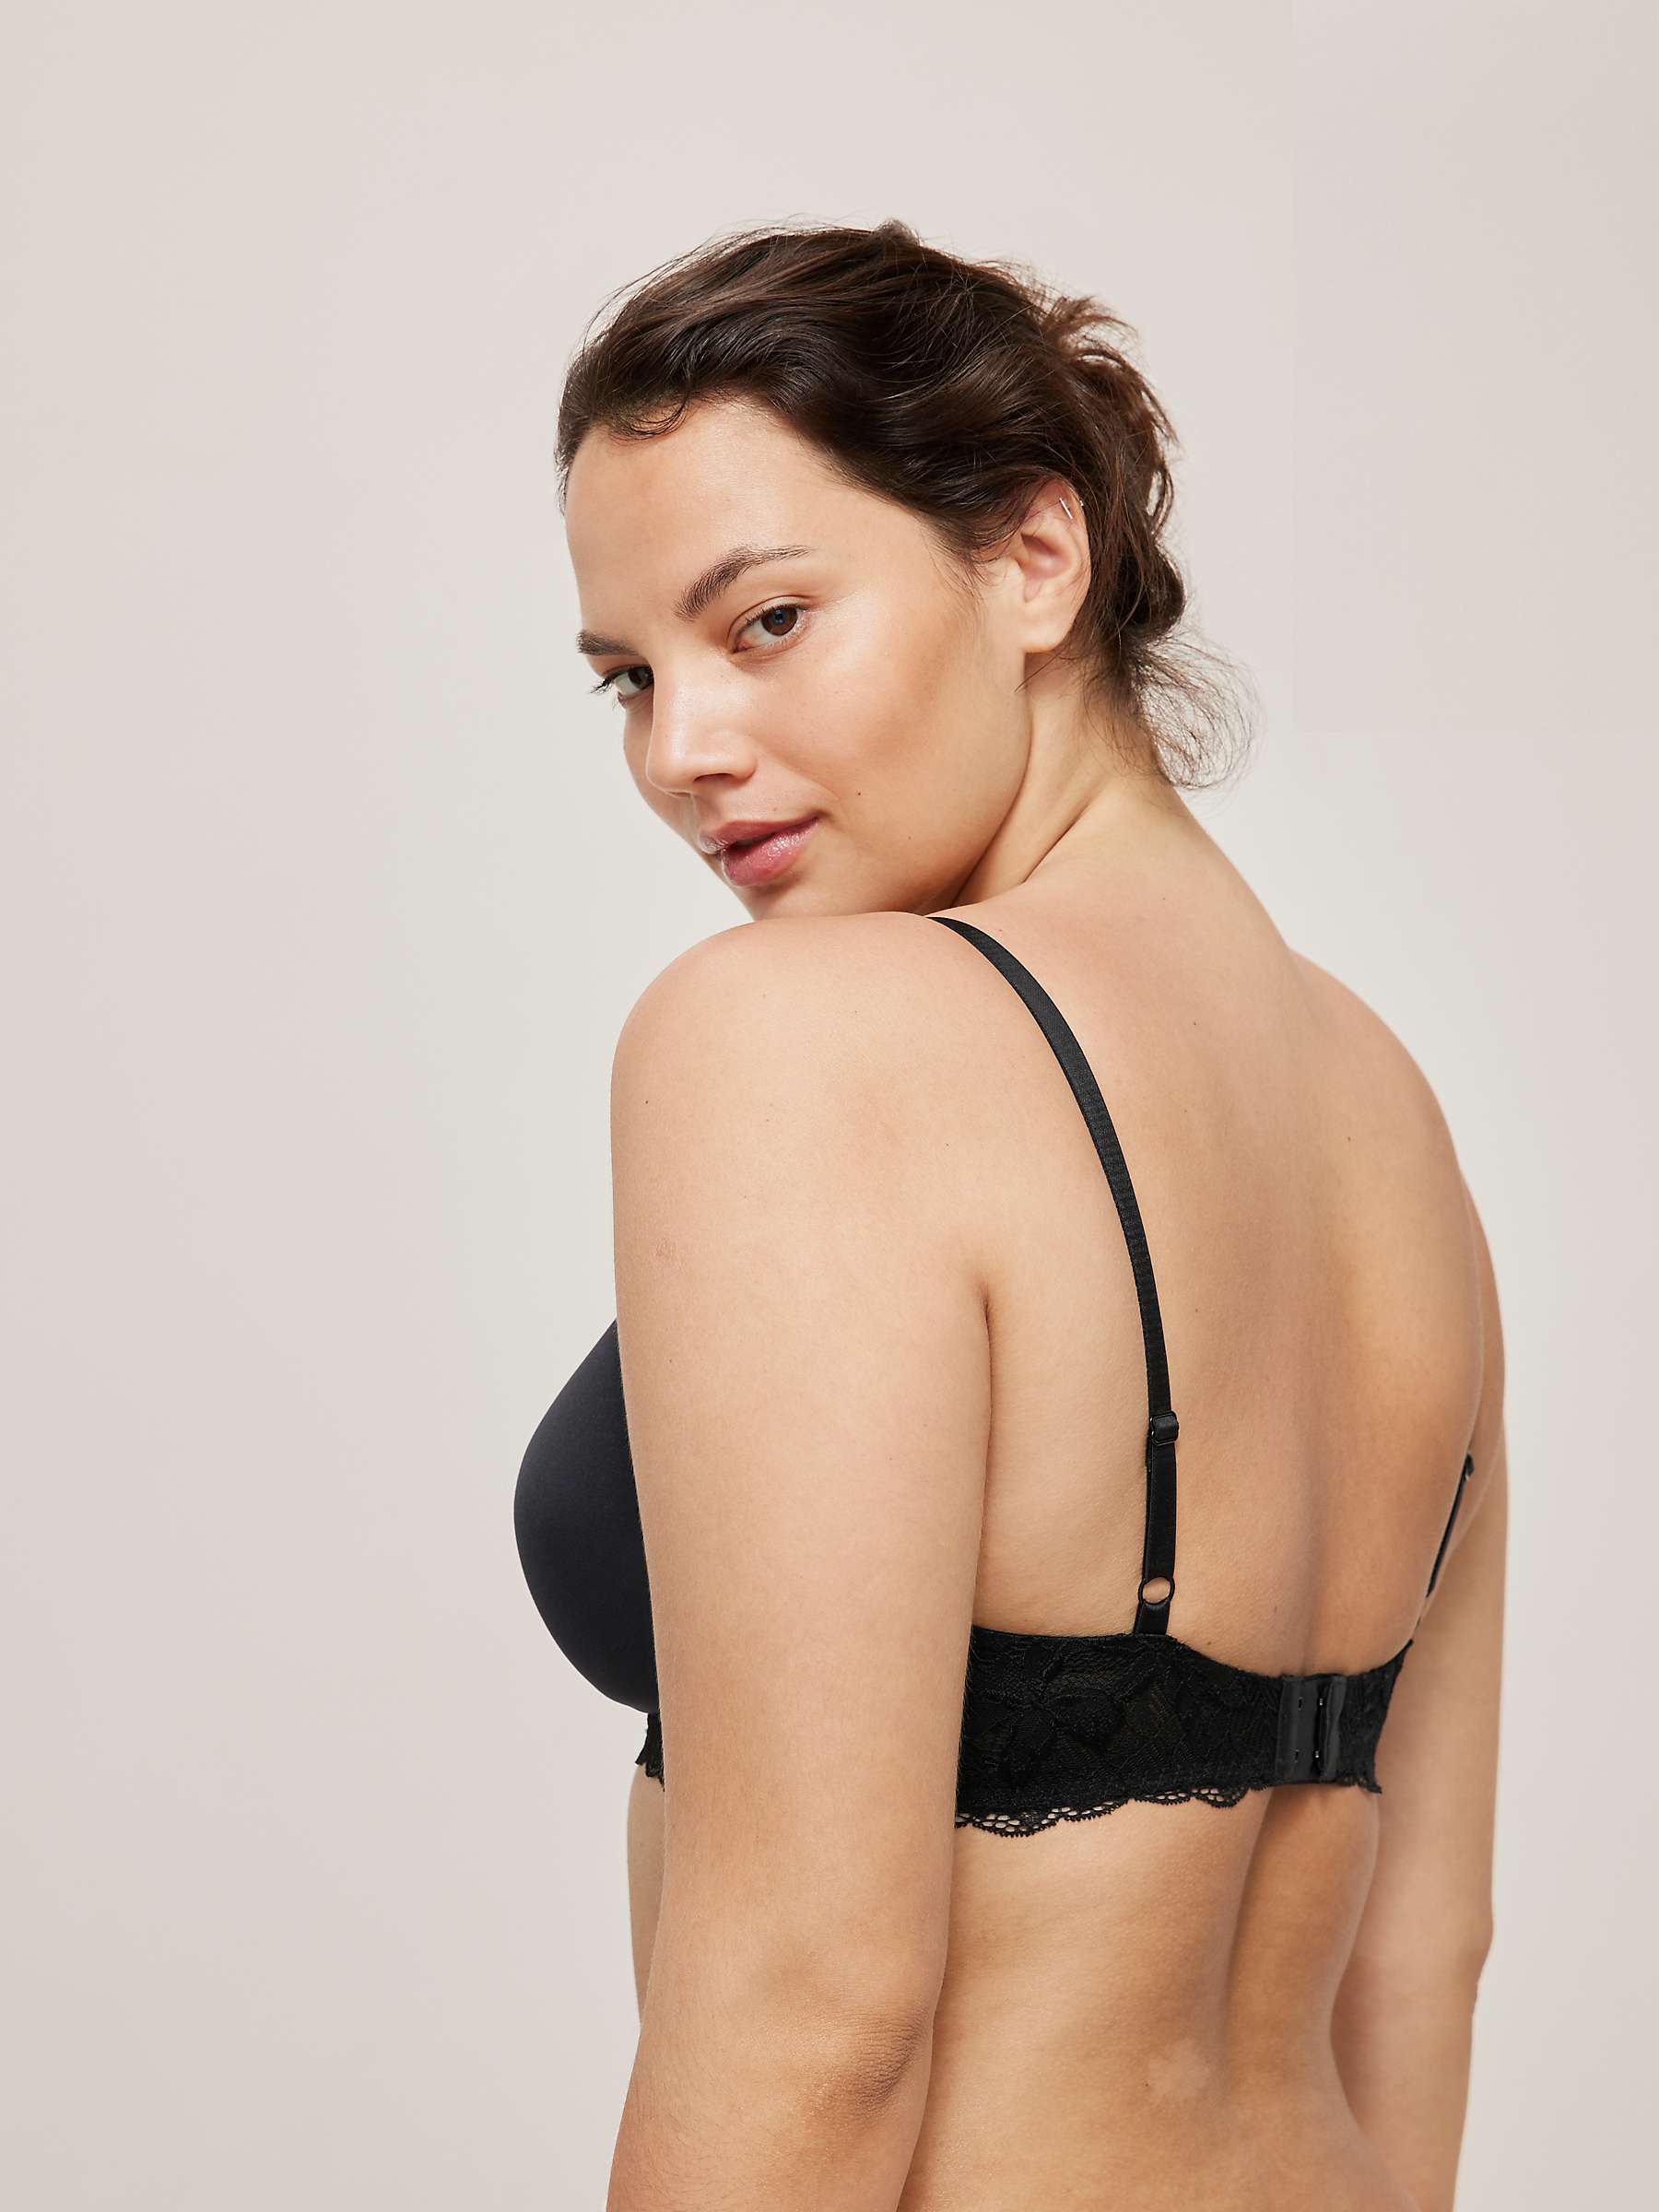 Buy John Lewis ANYDAY Willow Non-Wired Bra Online at johnlewis.com